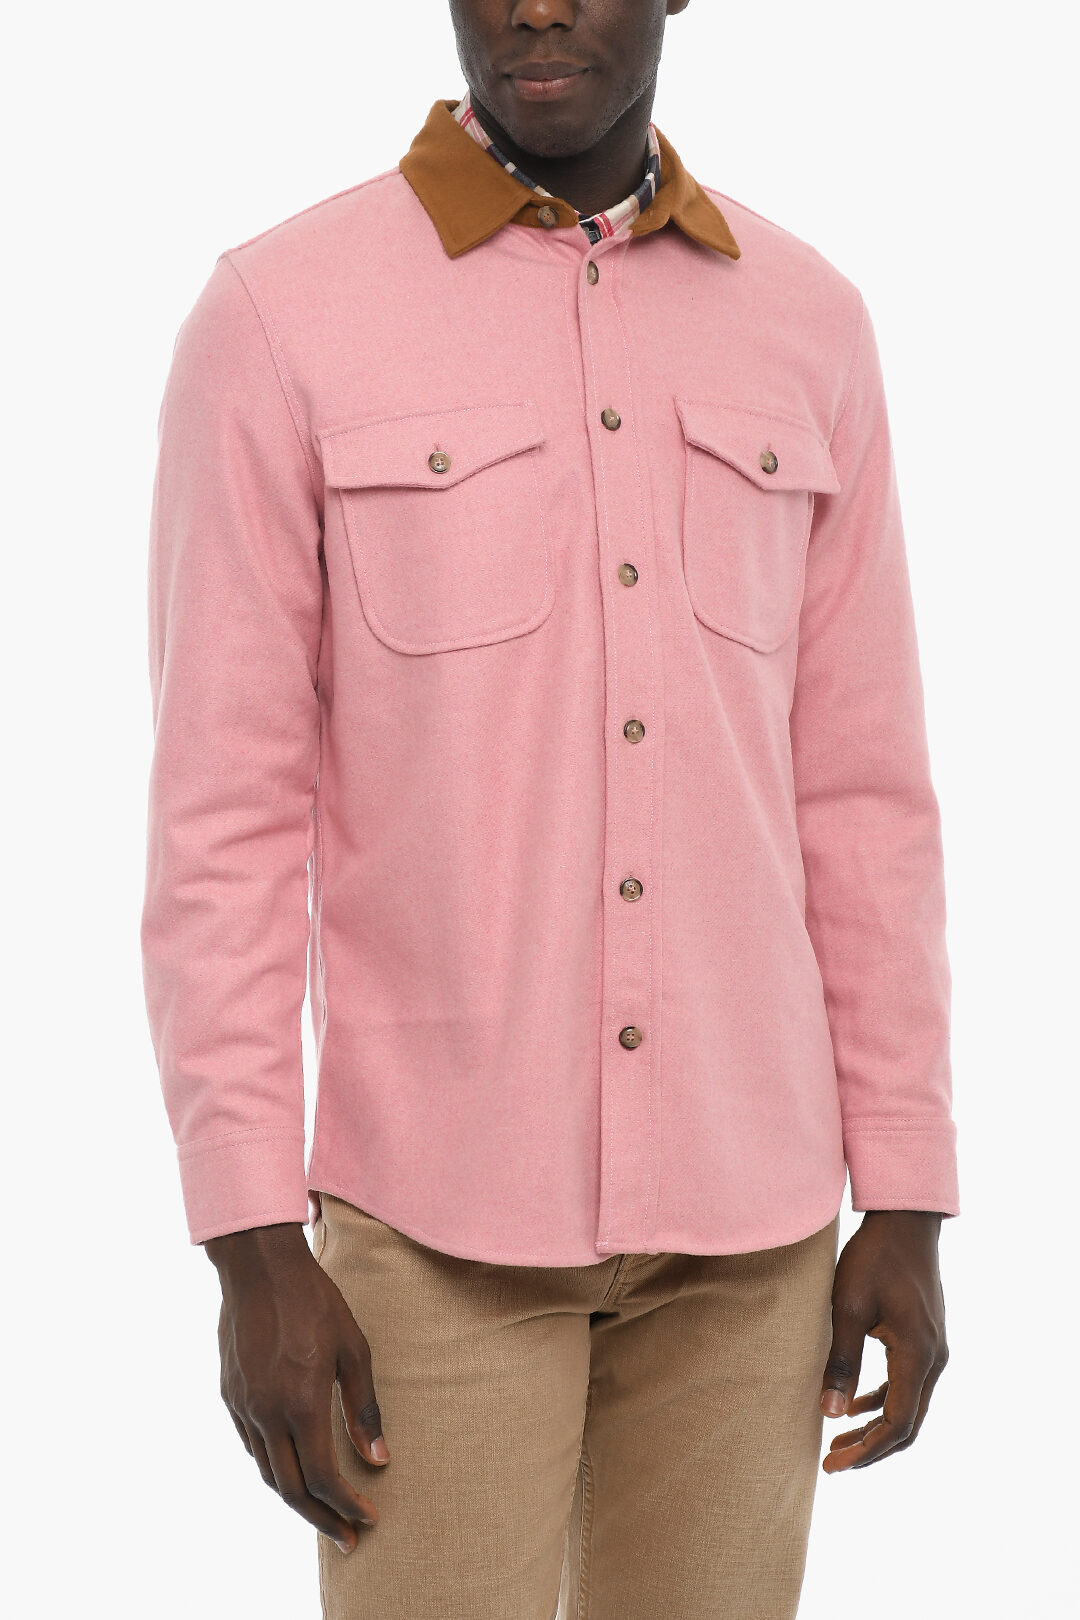 AIME' LEON DORE Wool Blend Overshirt with Double Breast Pocket